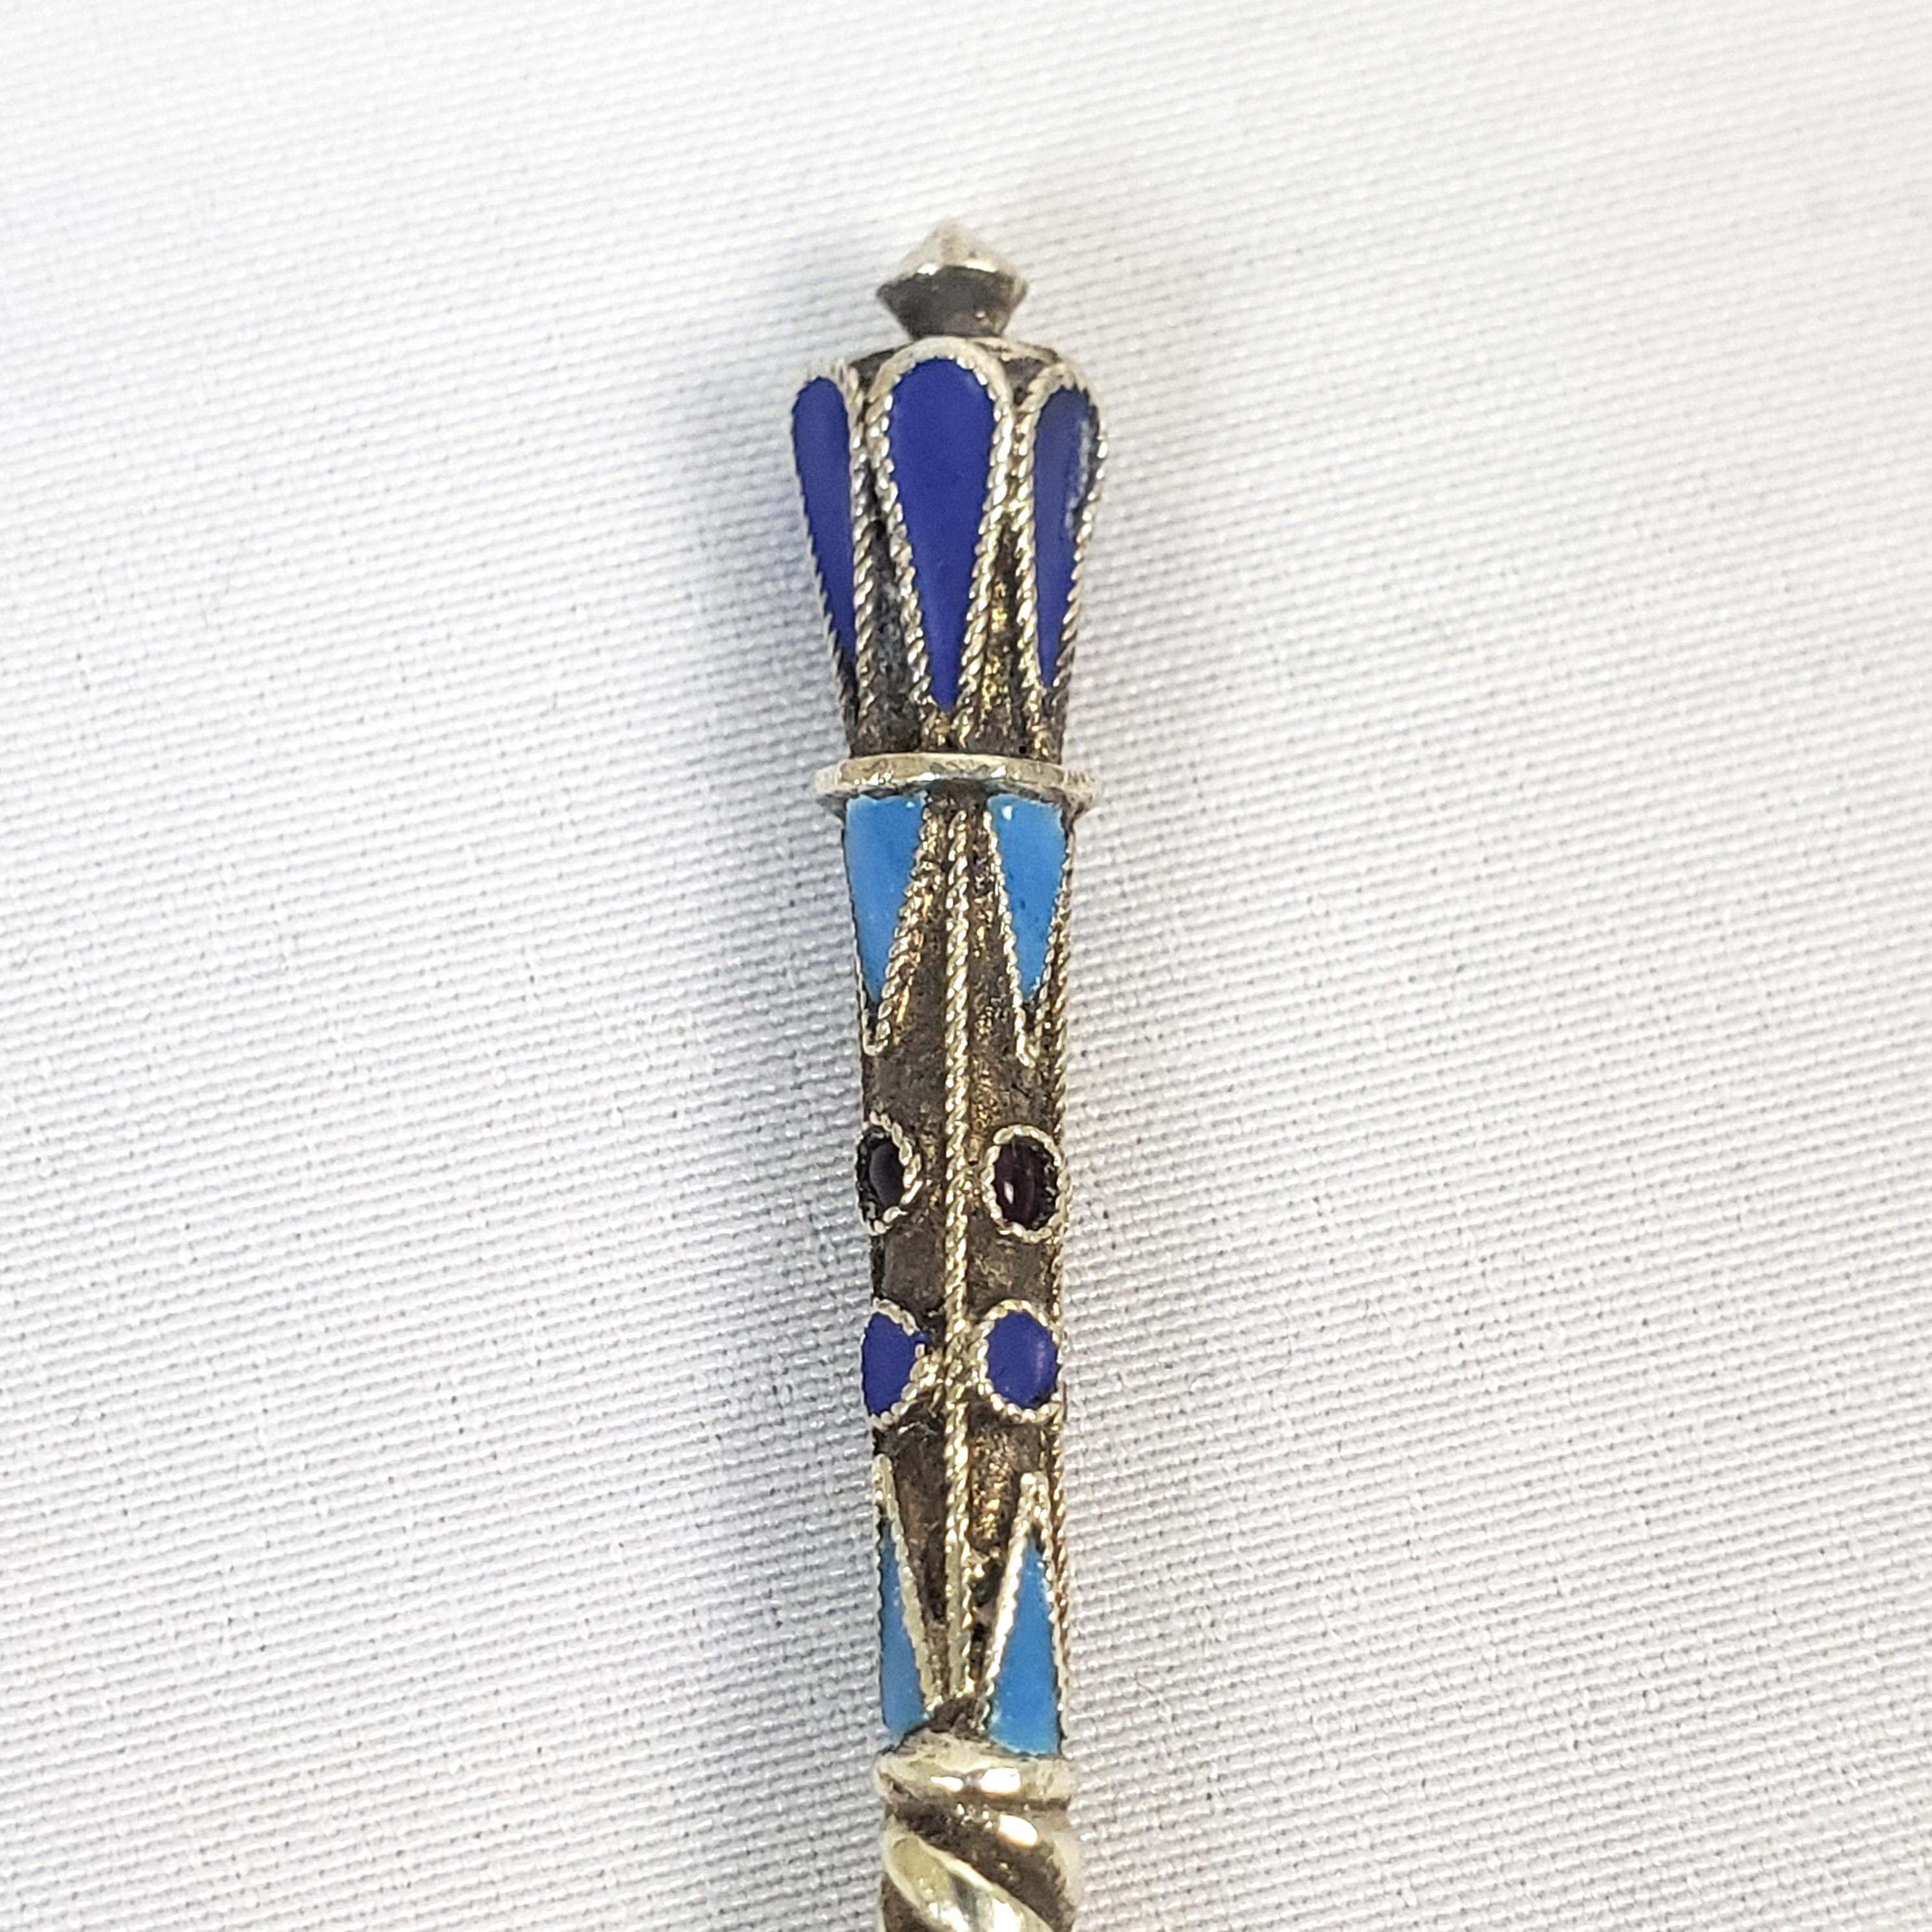 19th Century Antique Russian Silver & Enamel Spoon Set with Ornate Floral Motif For Sale